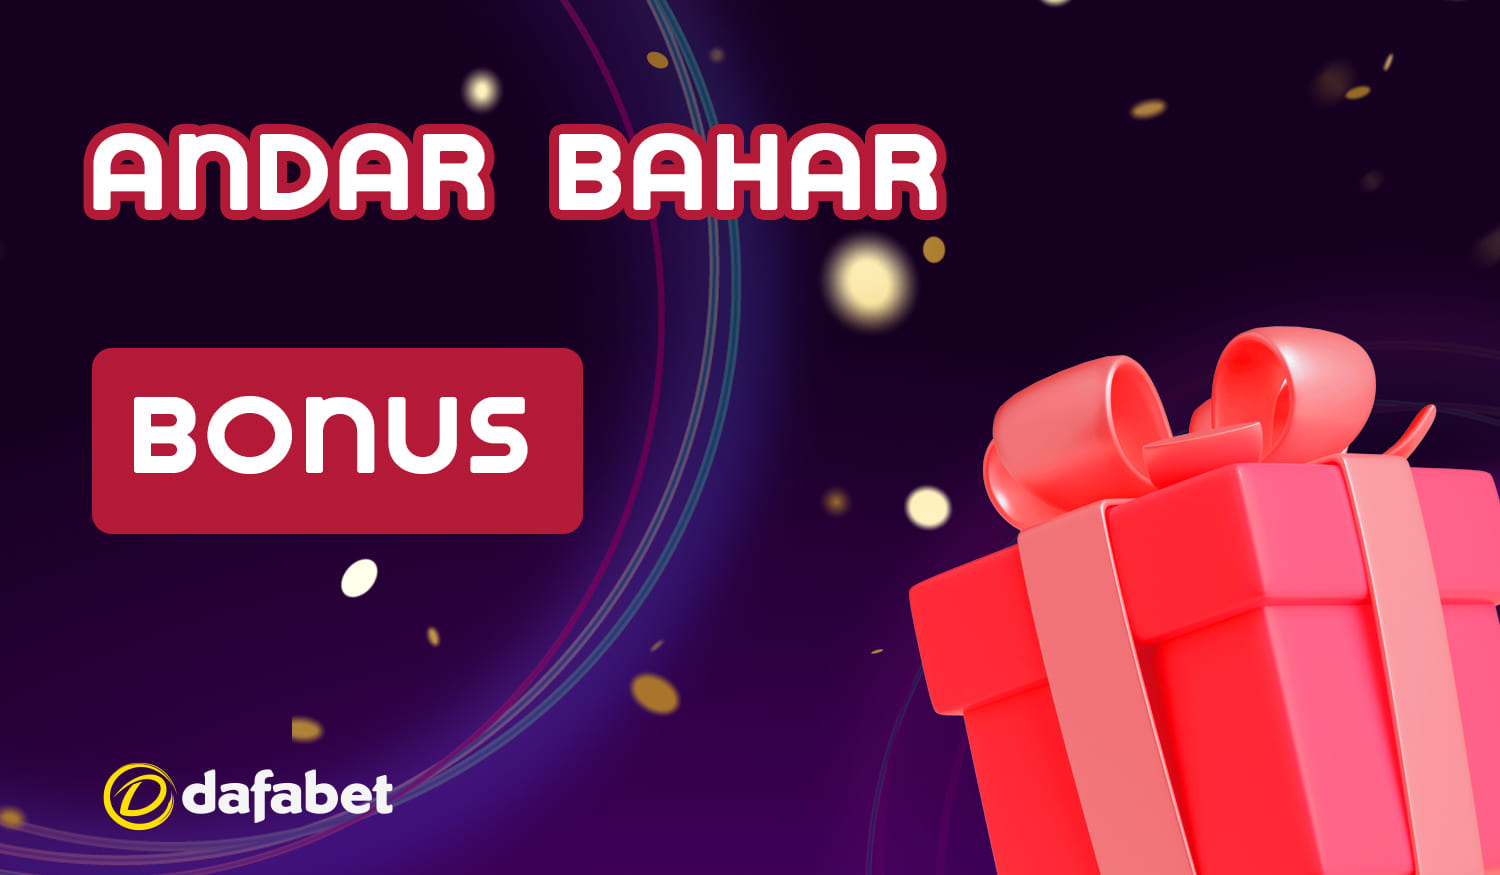 Bonuses that Indian players can get playing Andar Bahar in Dafabet